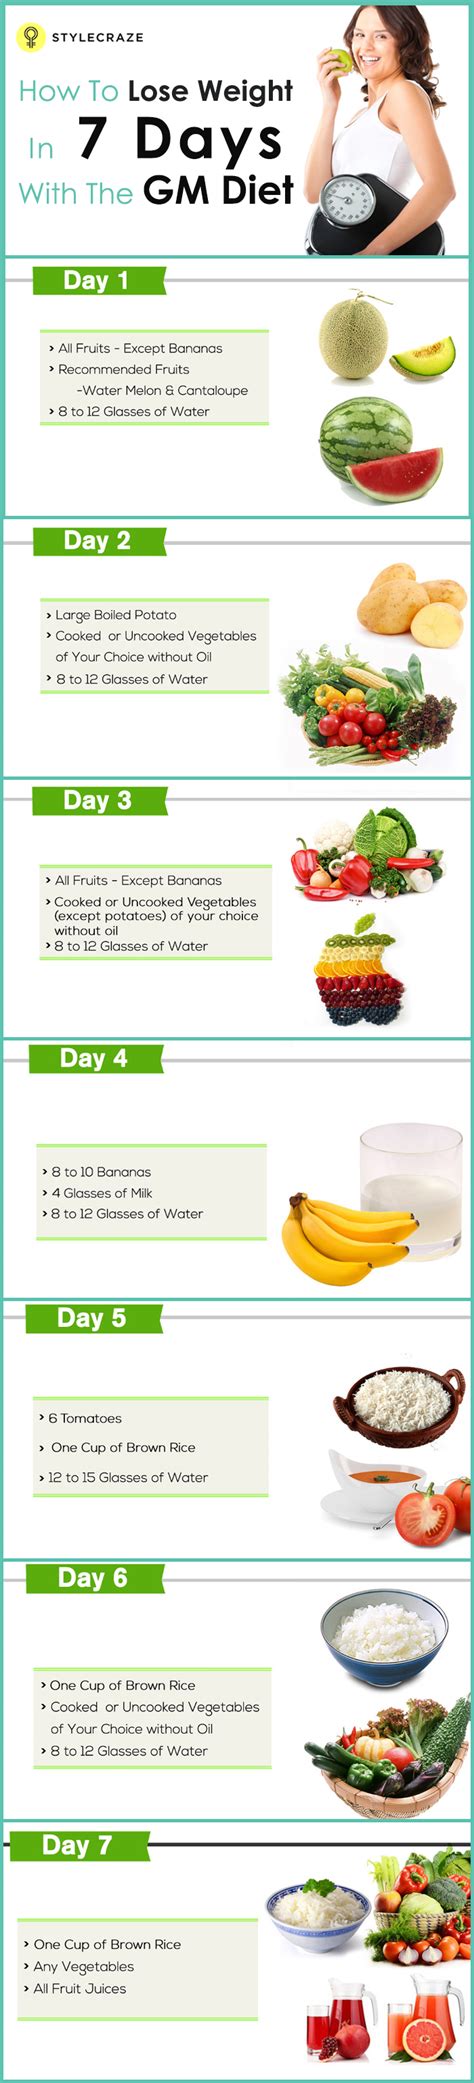 Diet Chart To Lose Weight In 7 Days